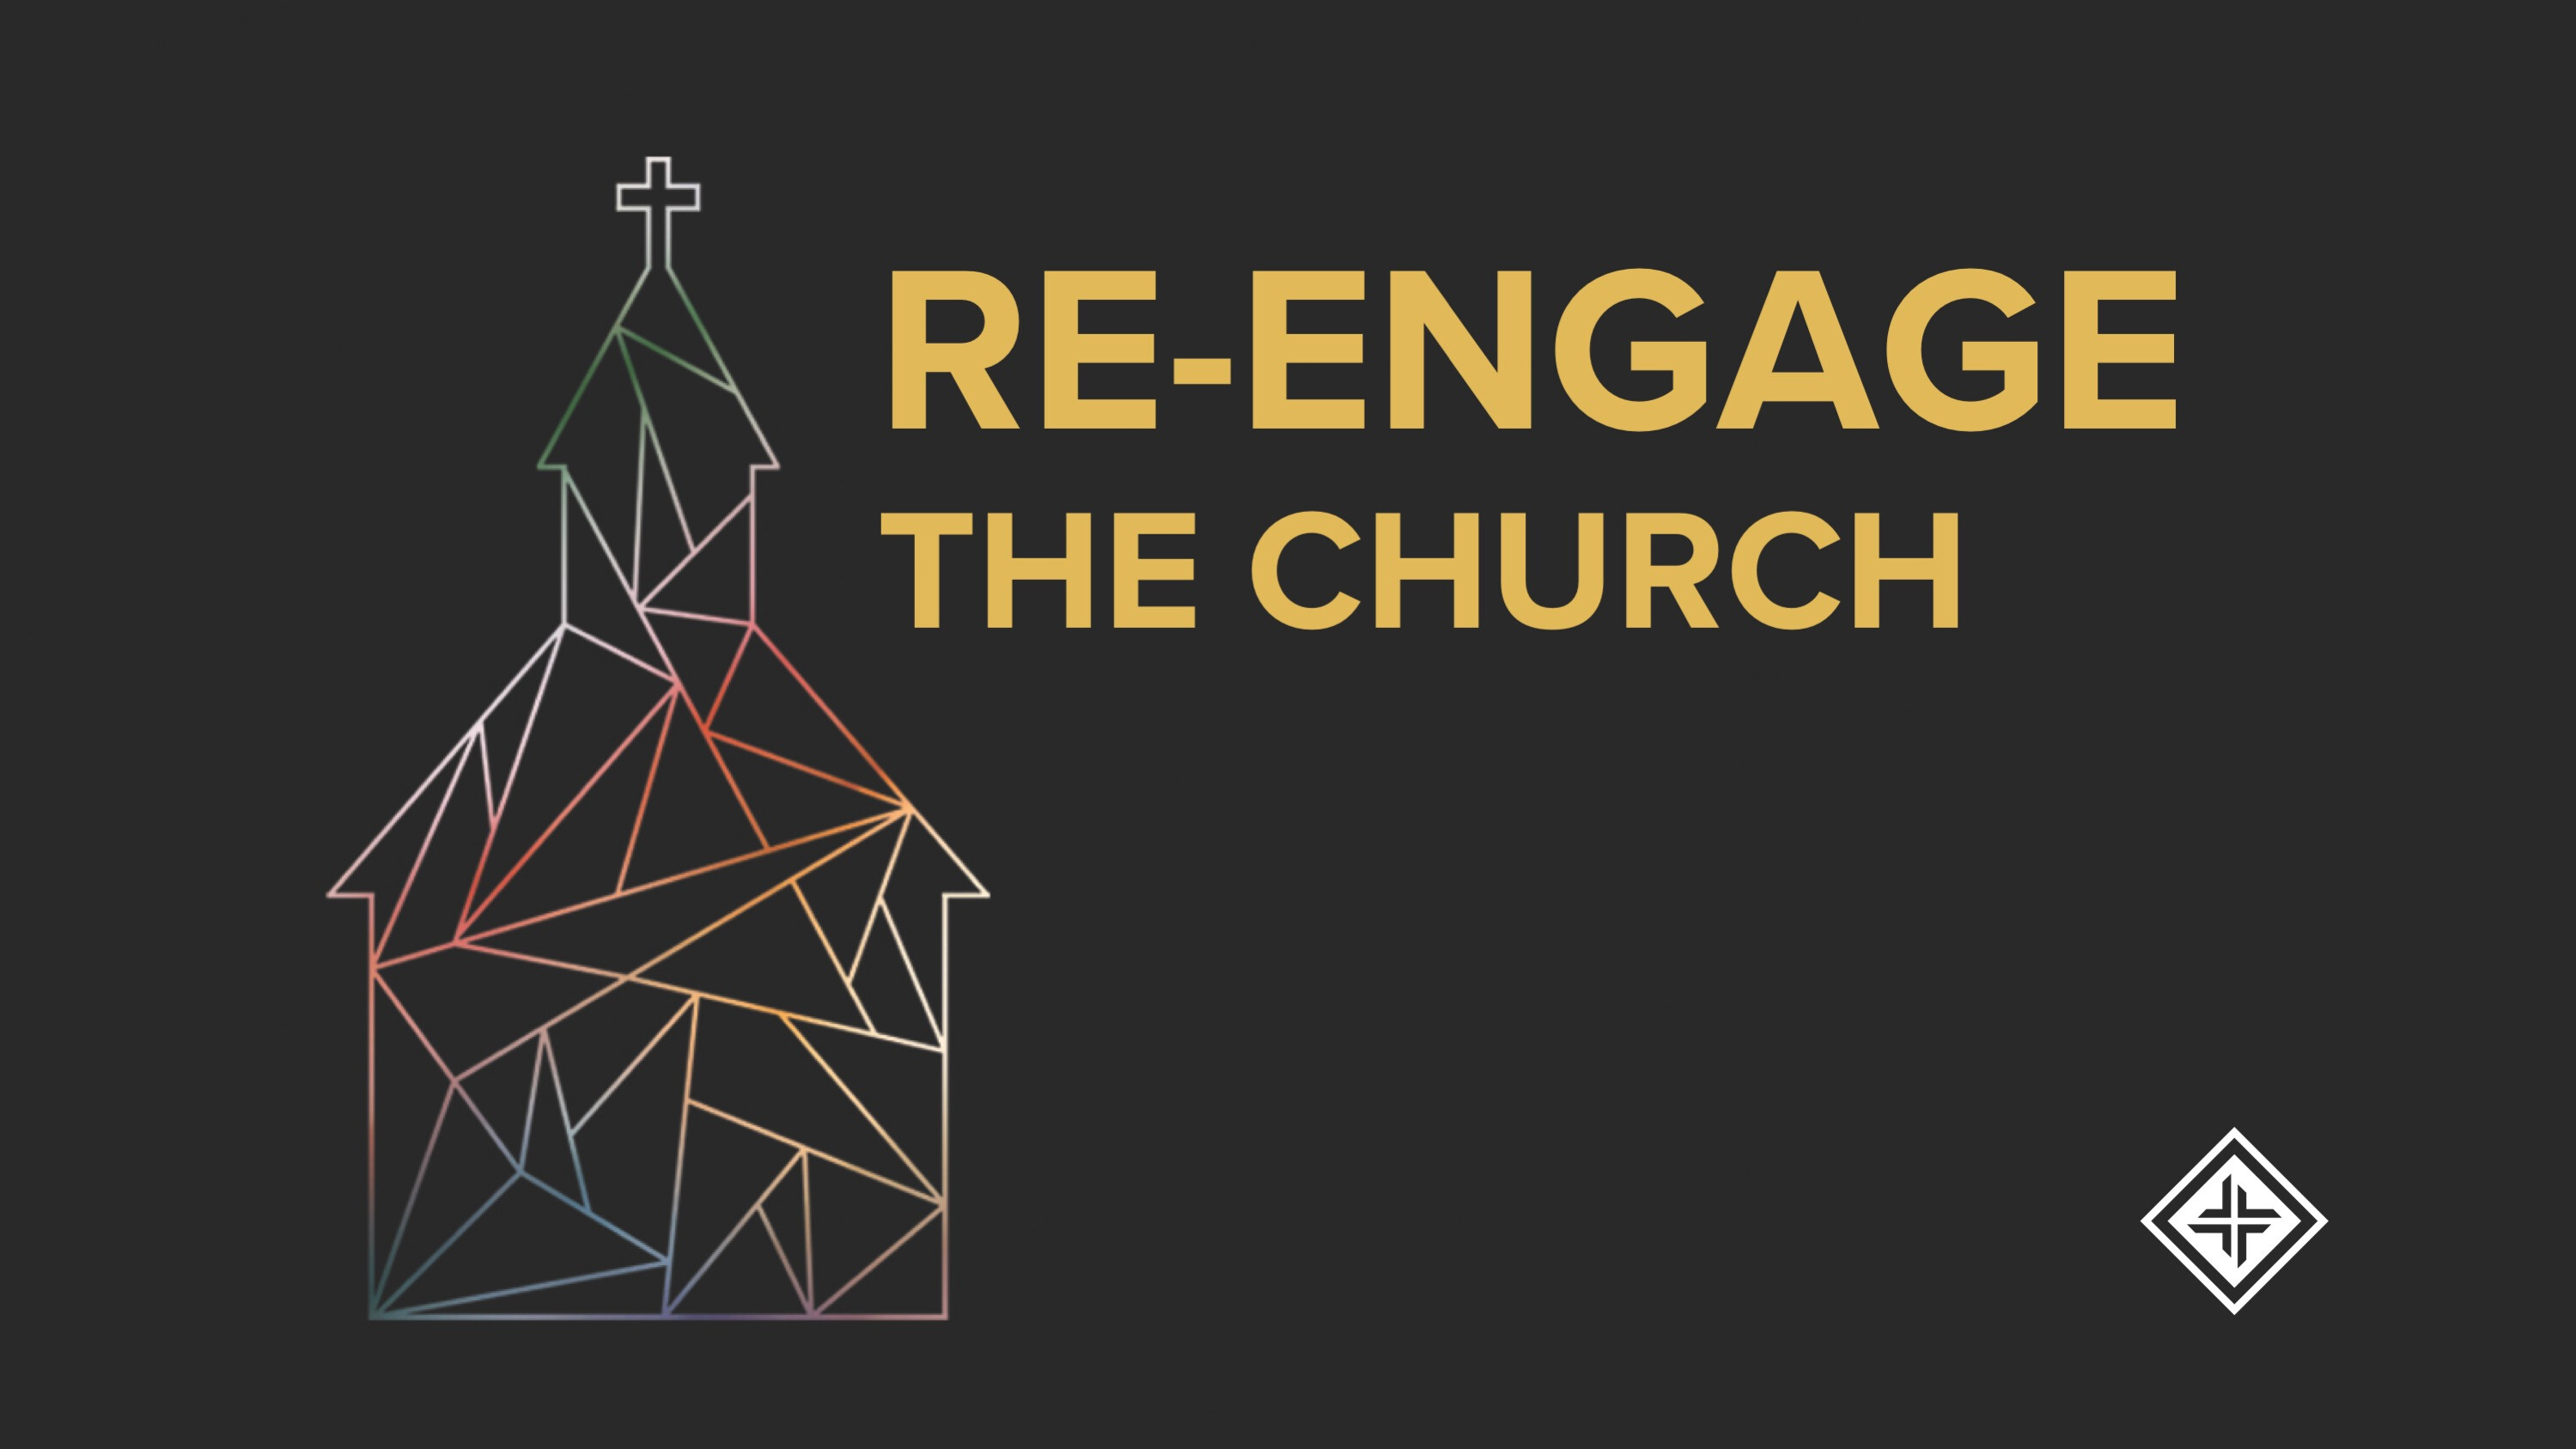 Re-Engage the Church